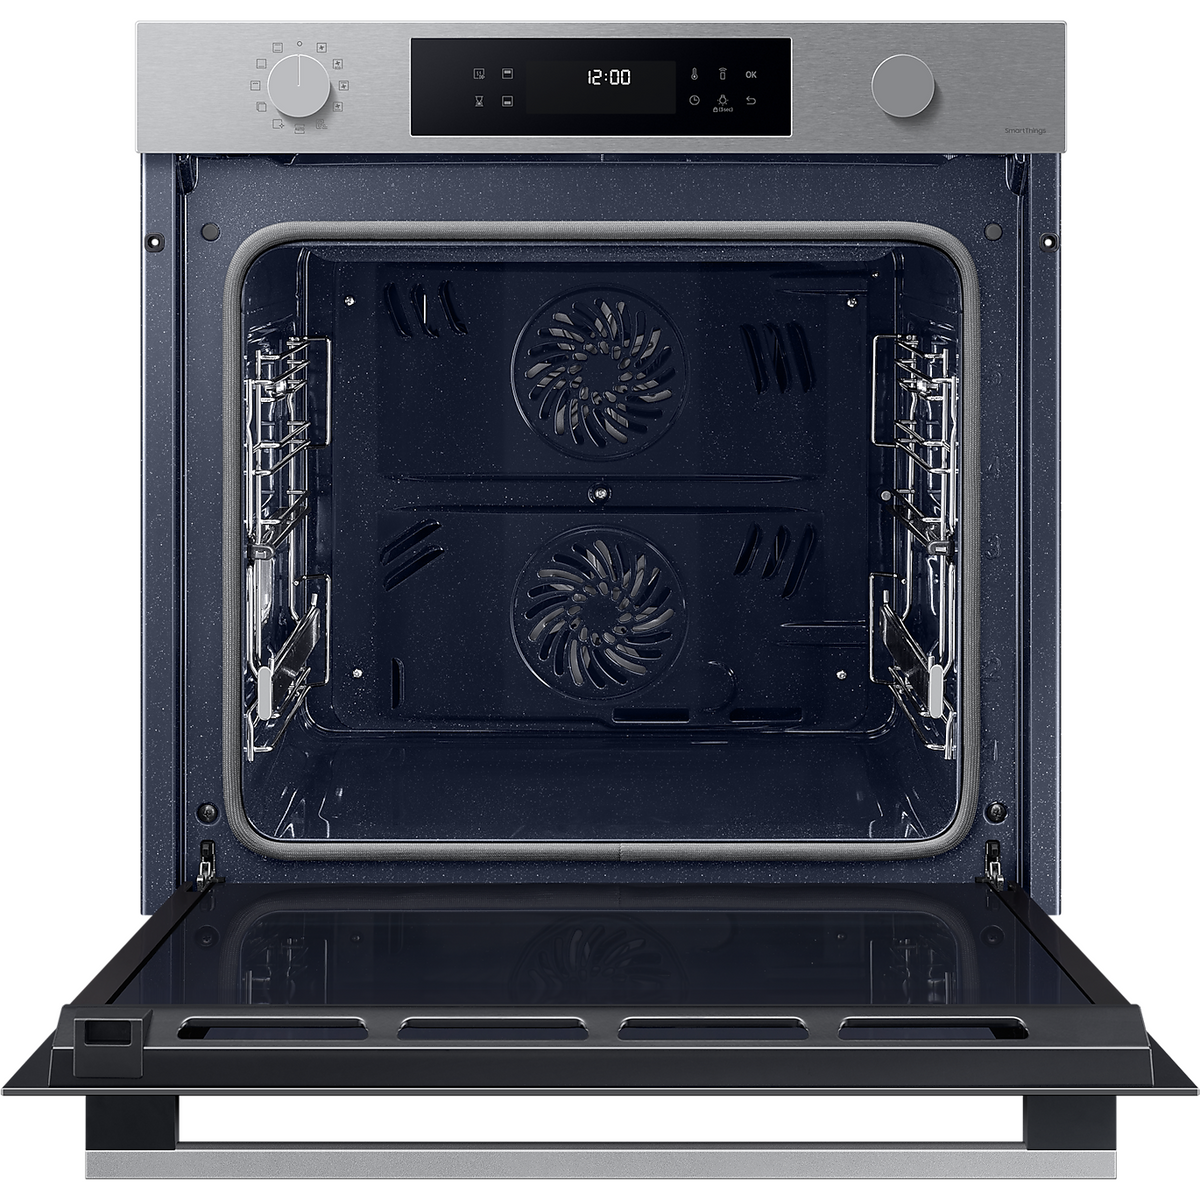 Samsung Series 4 76L Electric Smart Oven with Dual Cook - Stainless Steel | NV7B4430ZAS/U4 (7645101392060)